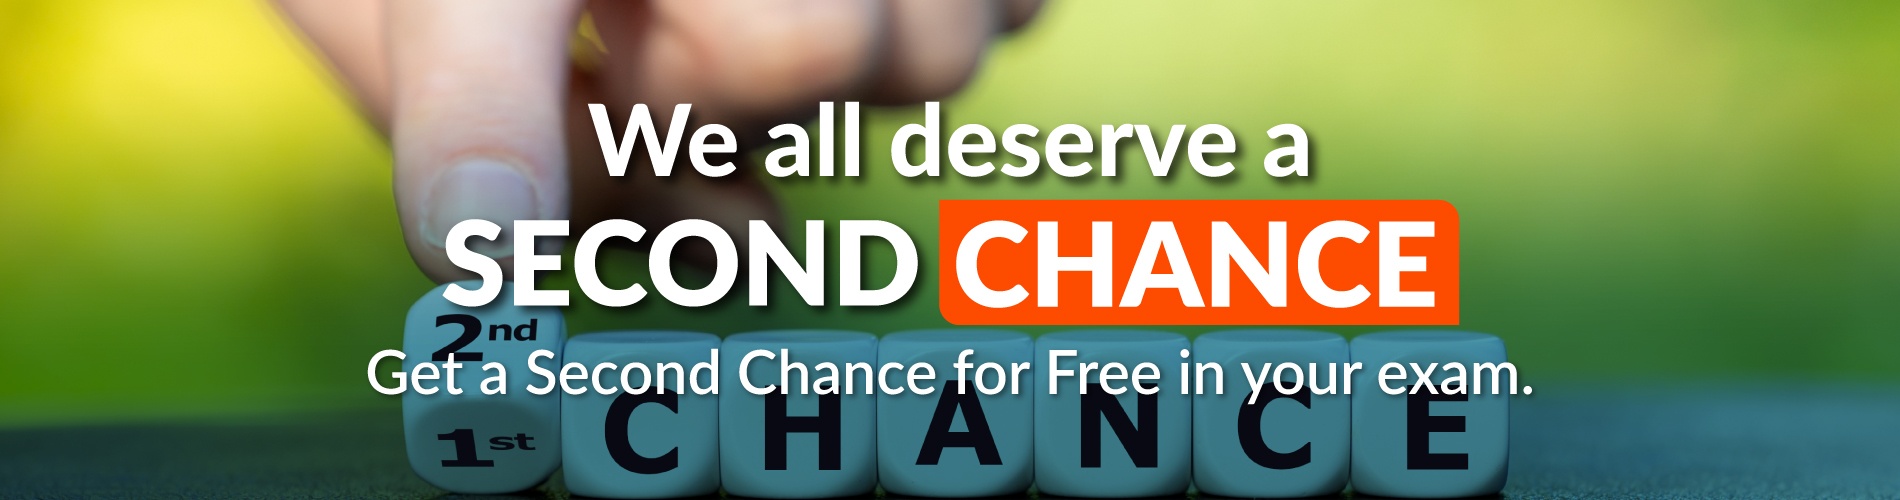 Second Chance has been created to offer a second opportunity to candidates who have taken an exam to obtain any certification but still need to get the necessary score to pass and to give them a chance to strengthen their skills.